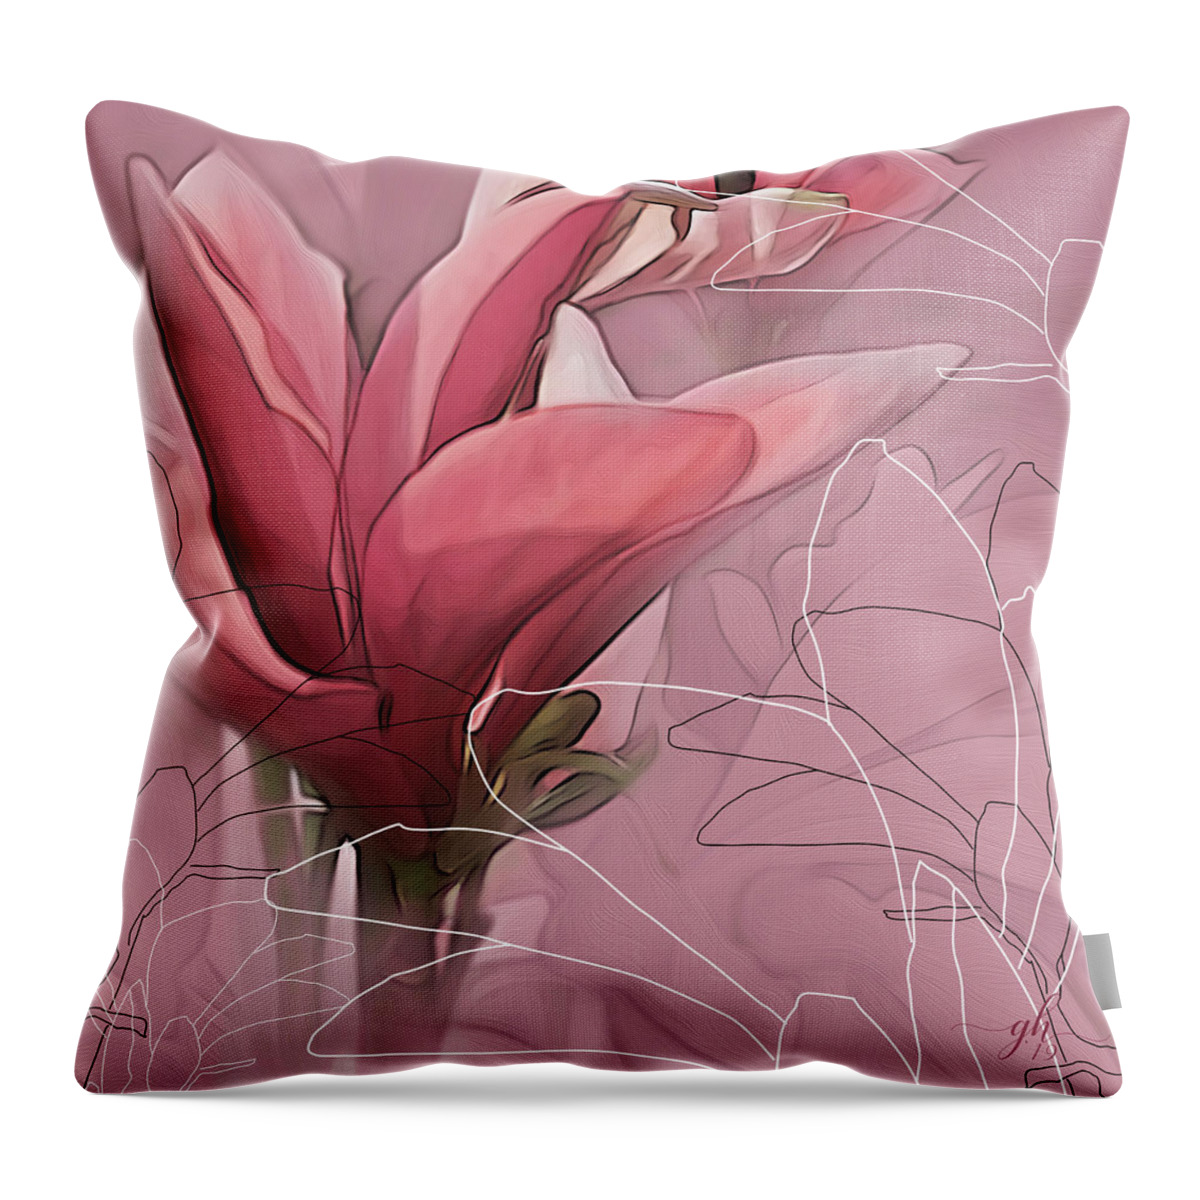 Saucer Magnolia Throw Pillow featuring the digital art Magnolia Musings by Gina Harrison